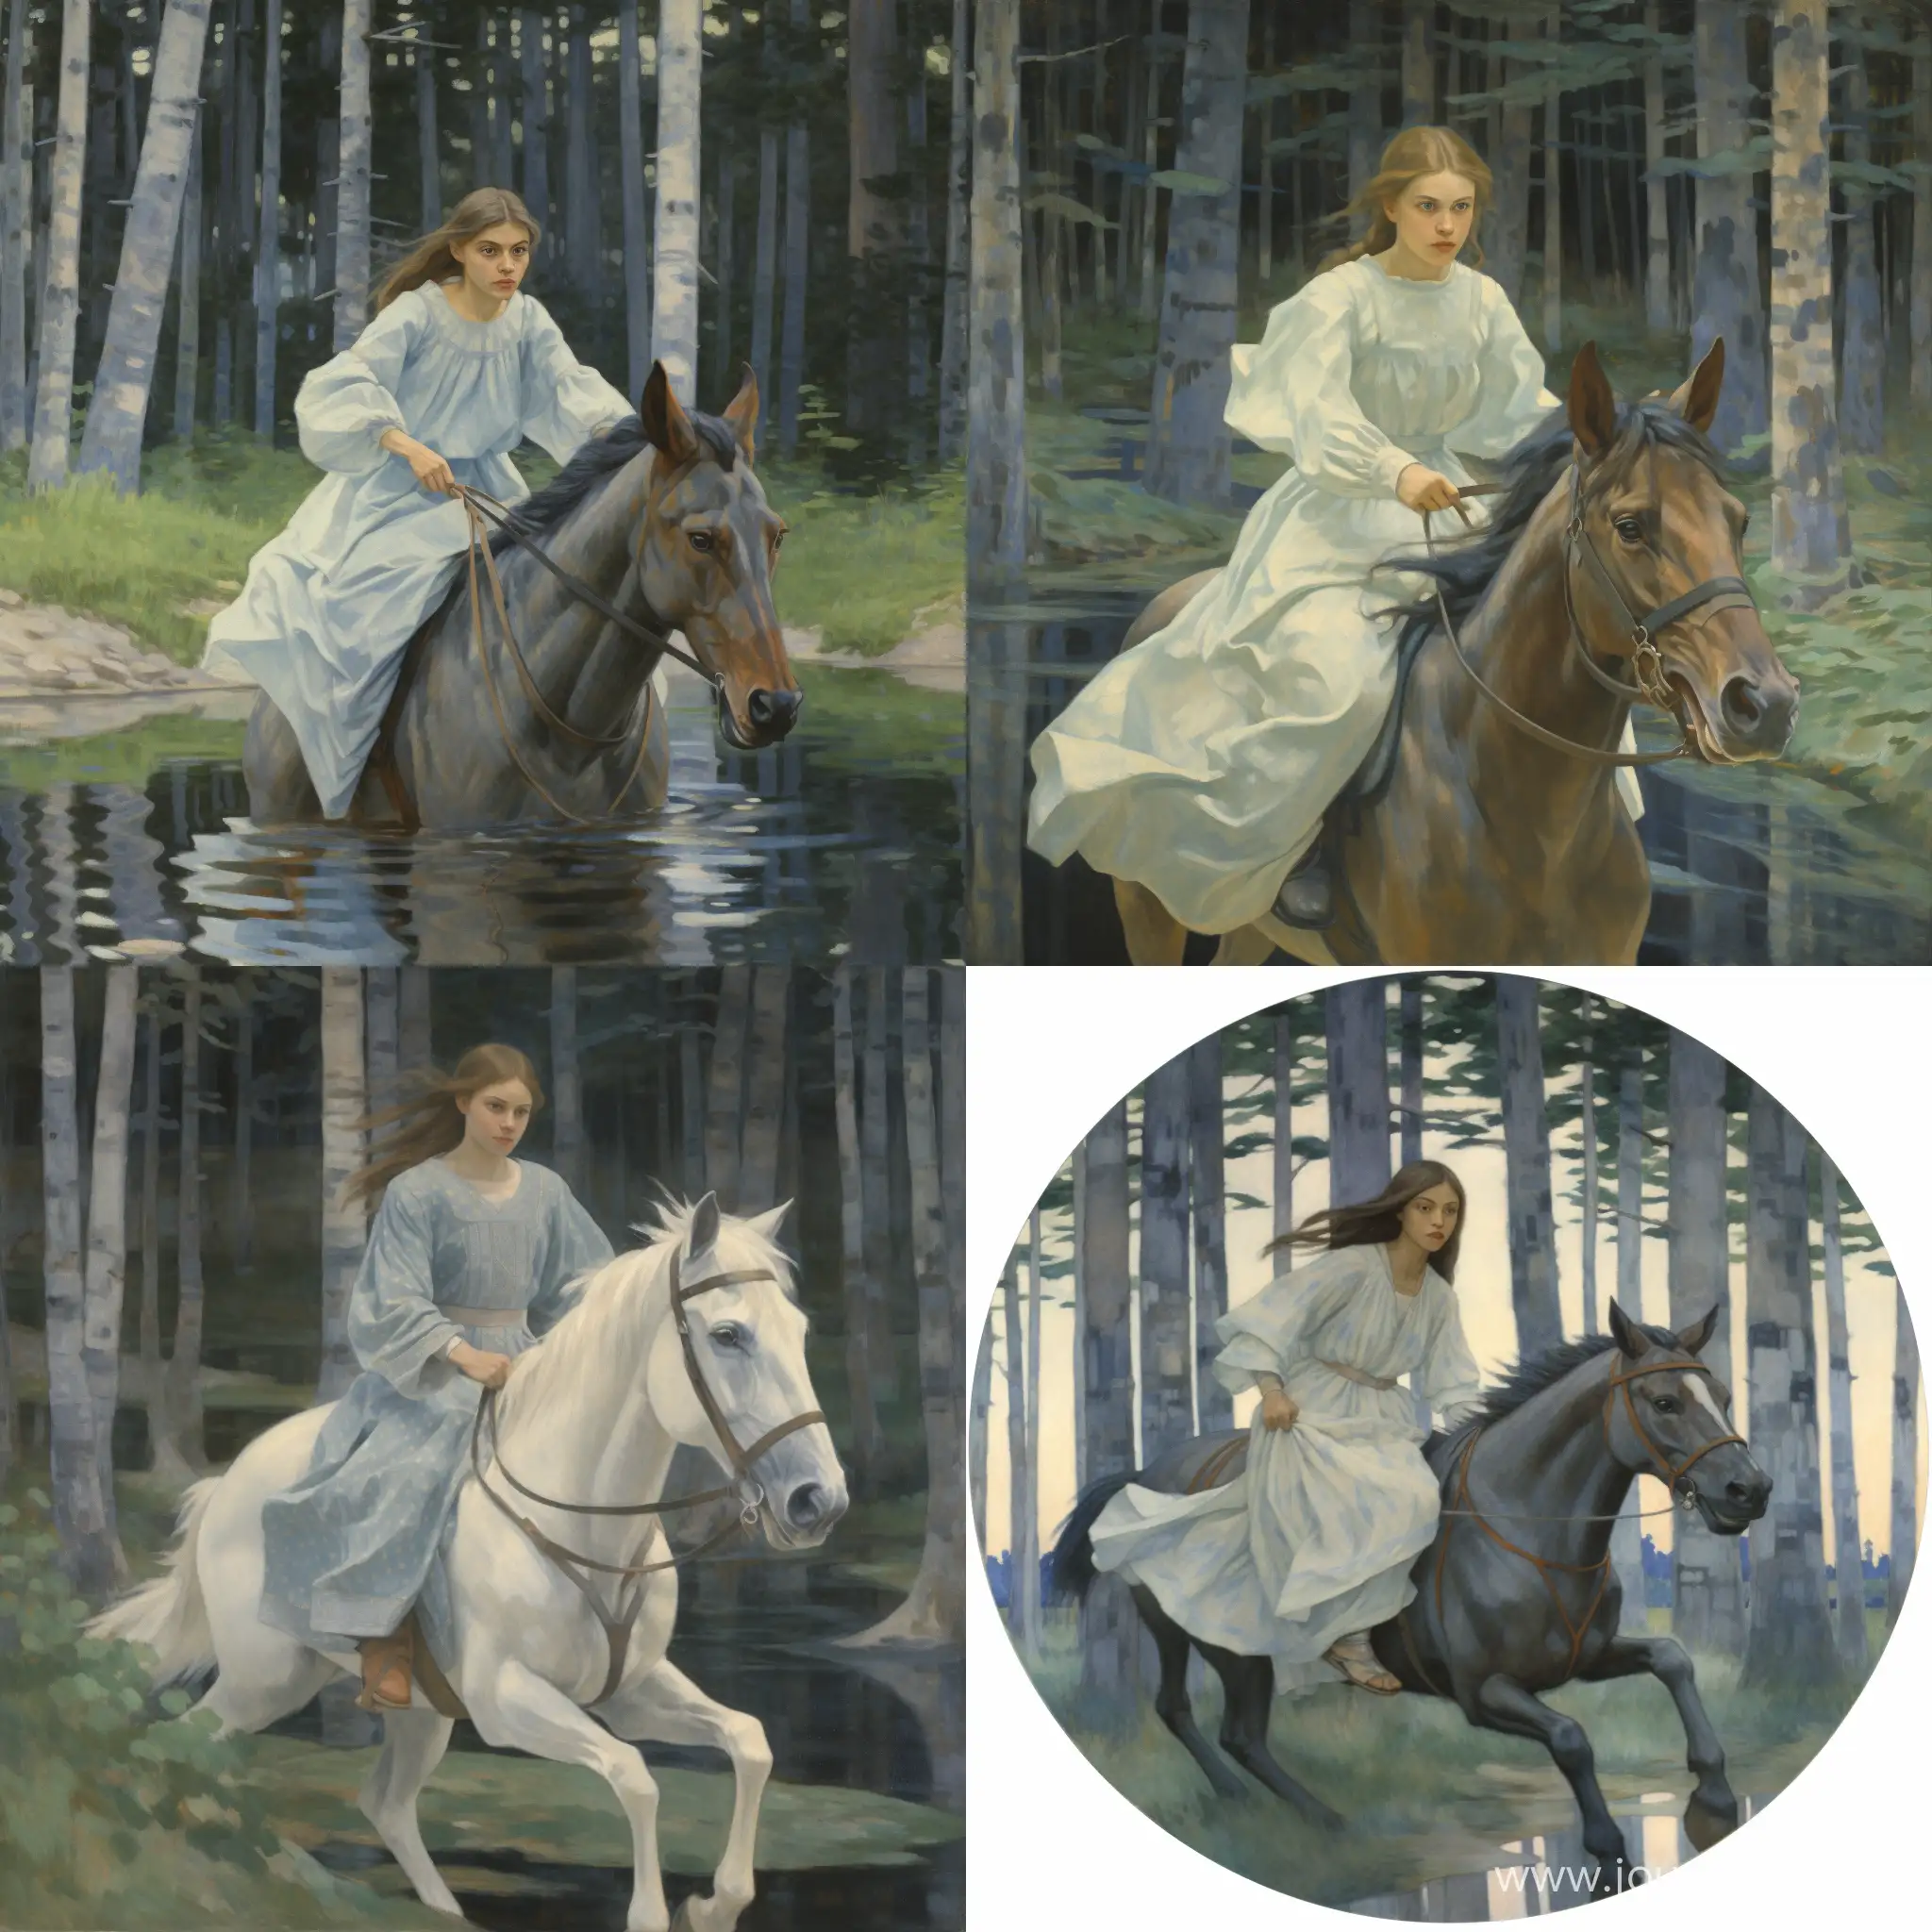 Young-Girl-Riding-Wolf-in-Enchanted-Forest-Painting